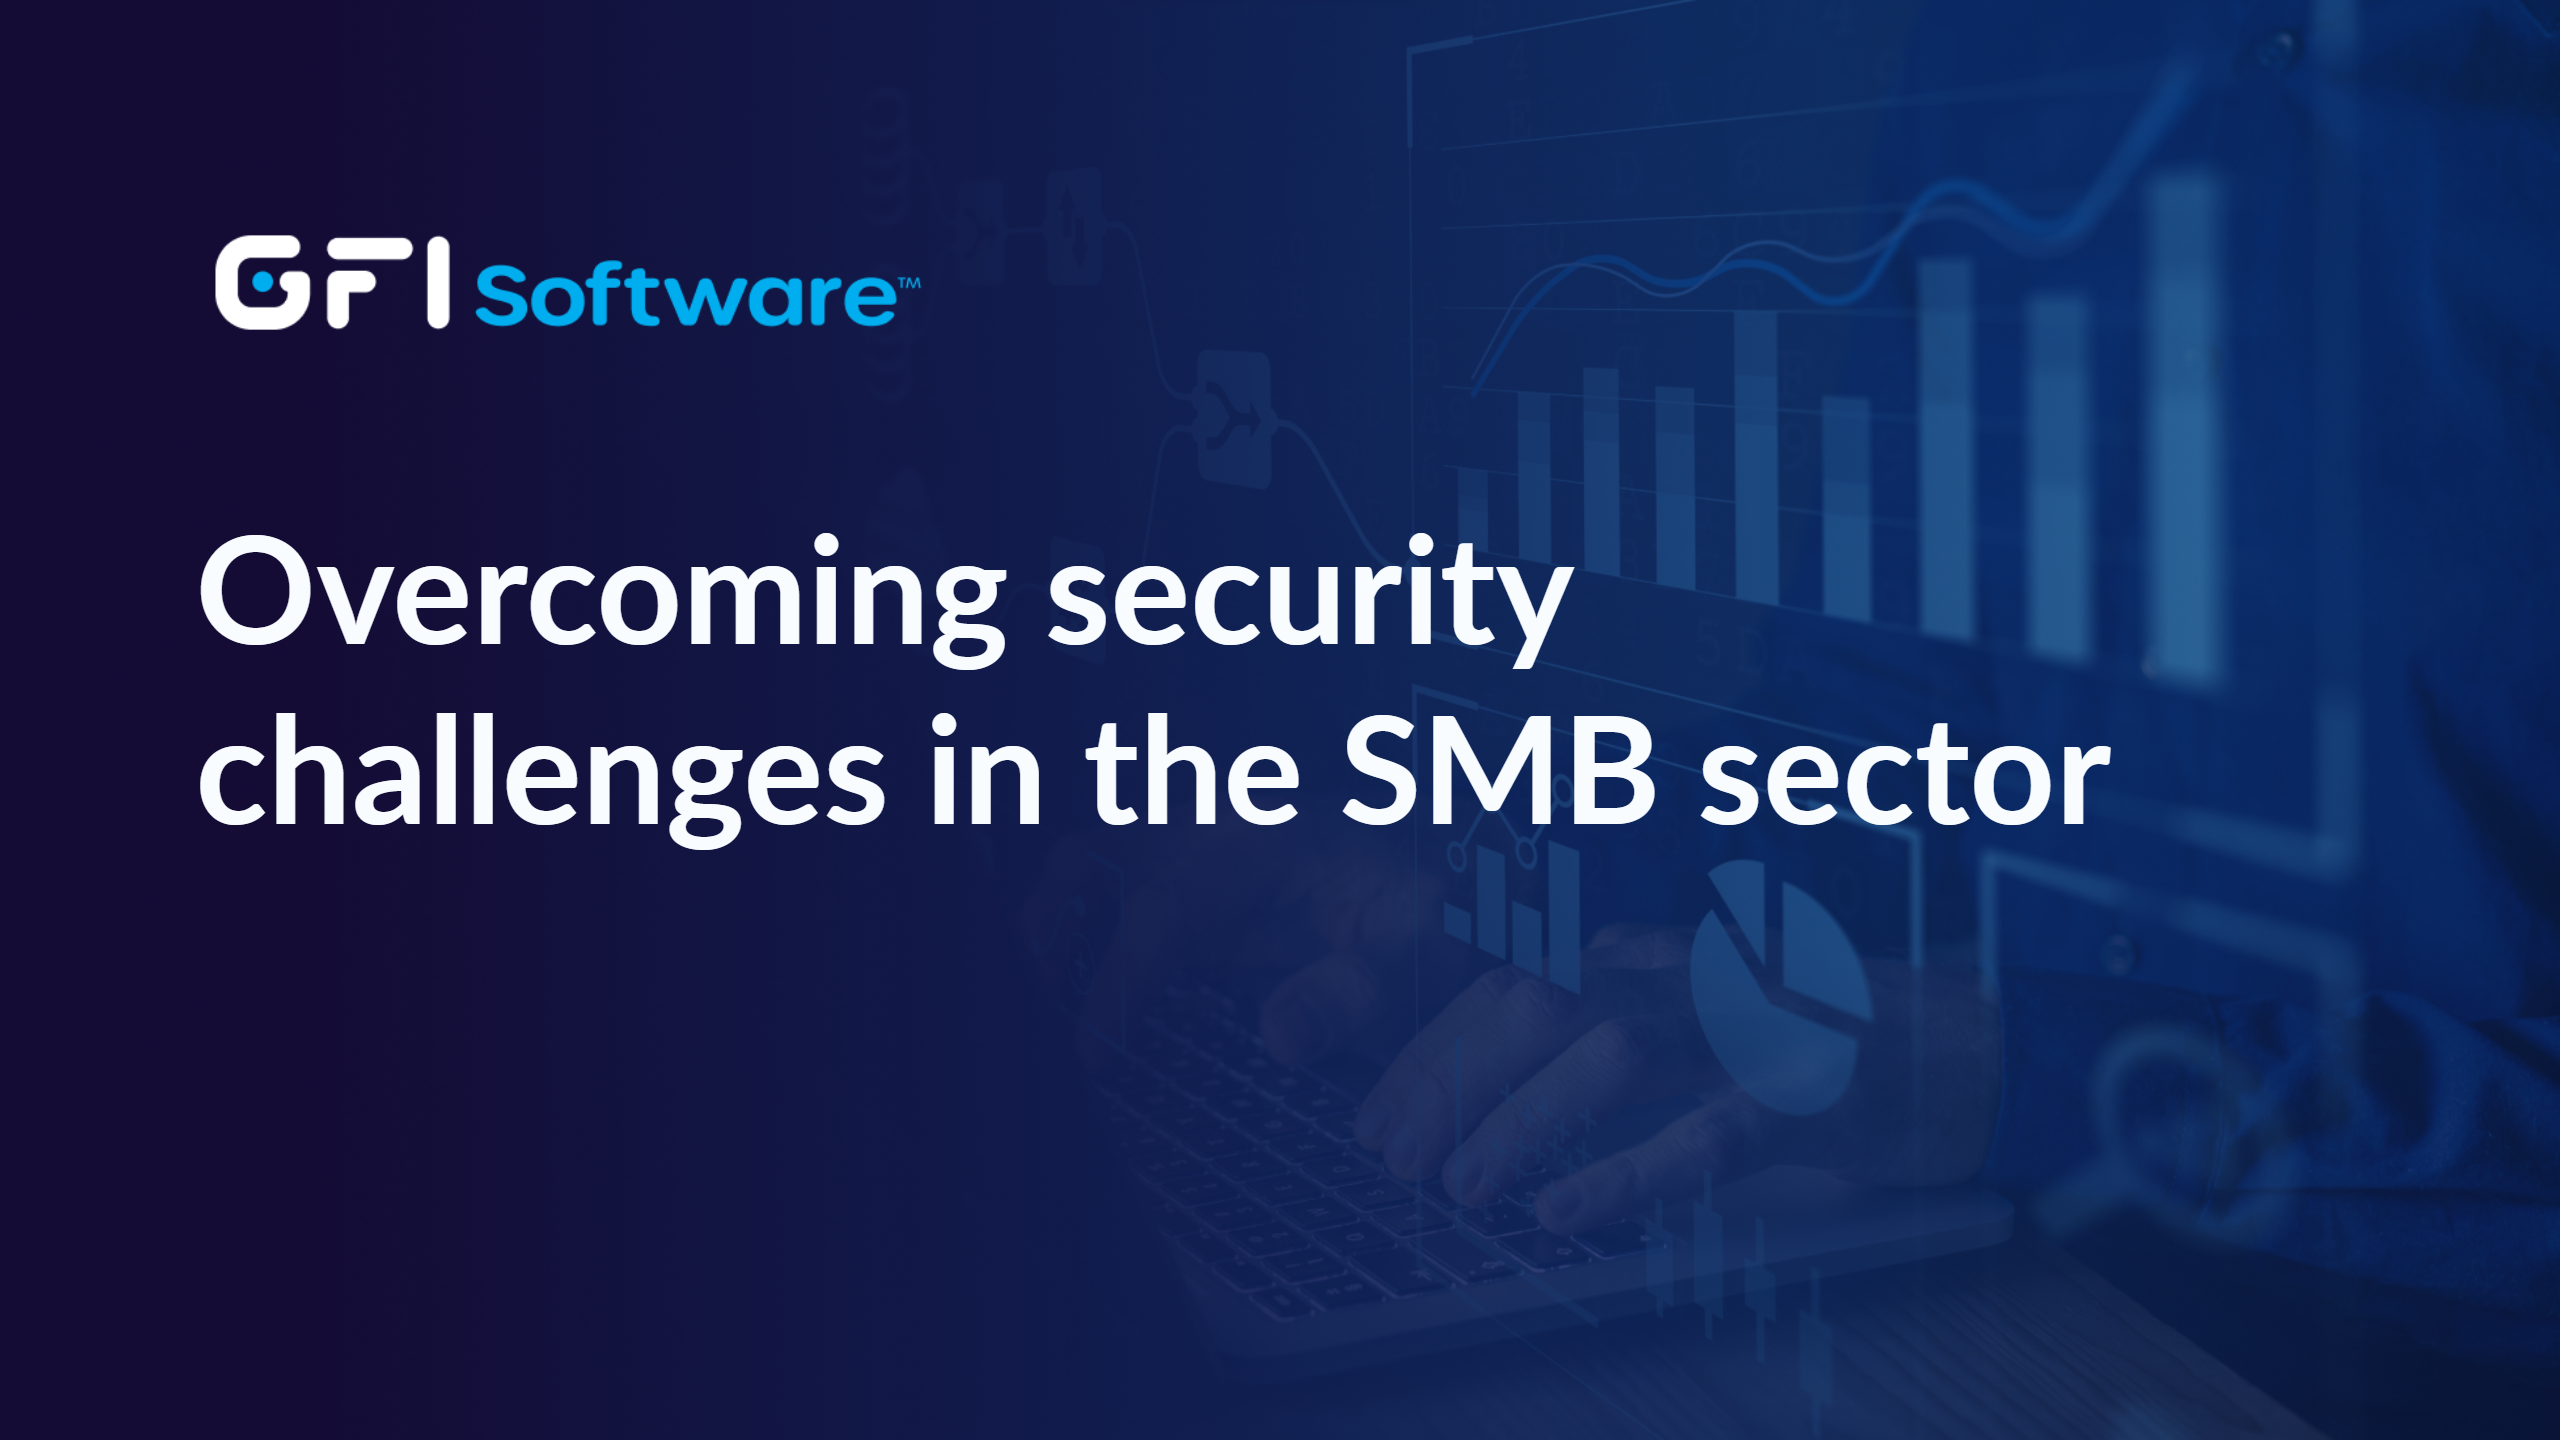 Webinar: Overcoming security challenges in the SMB sector